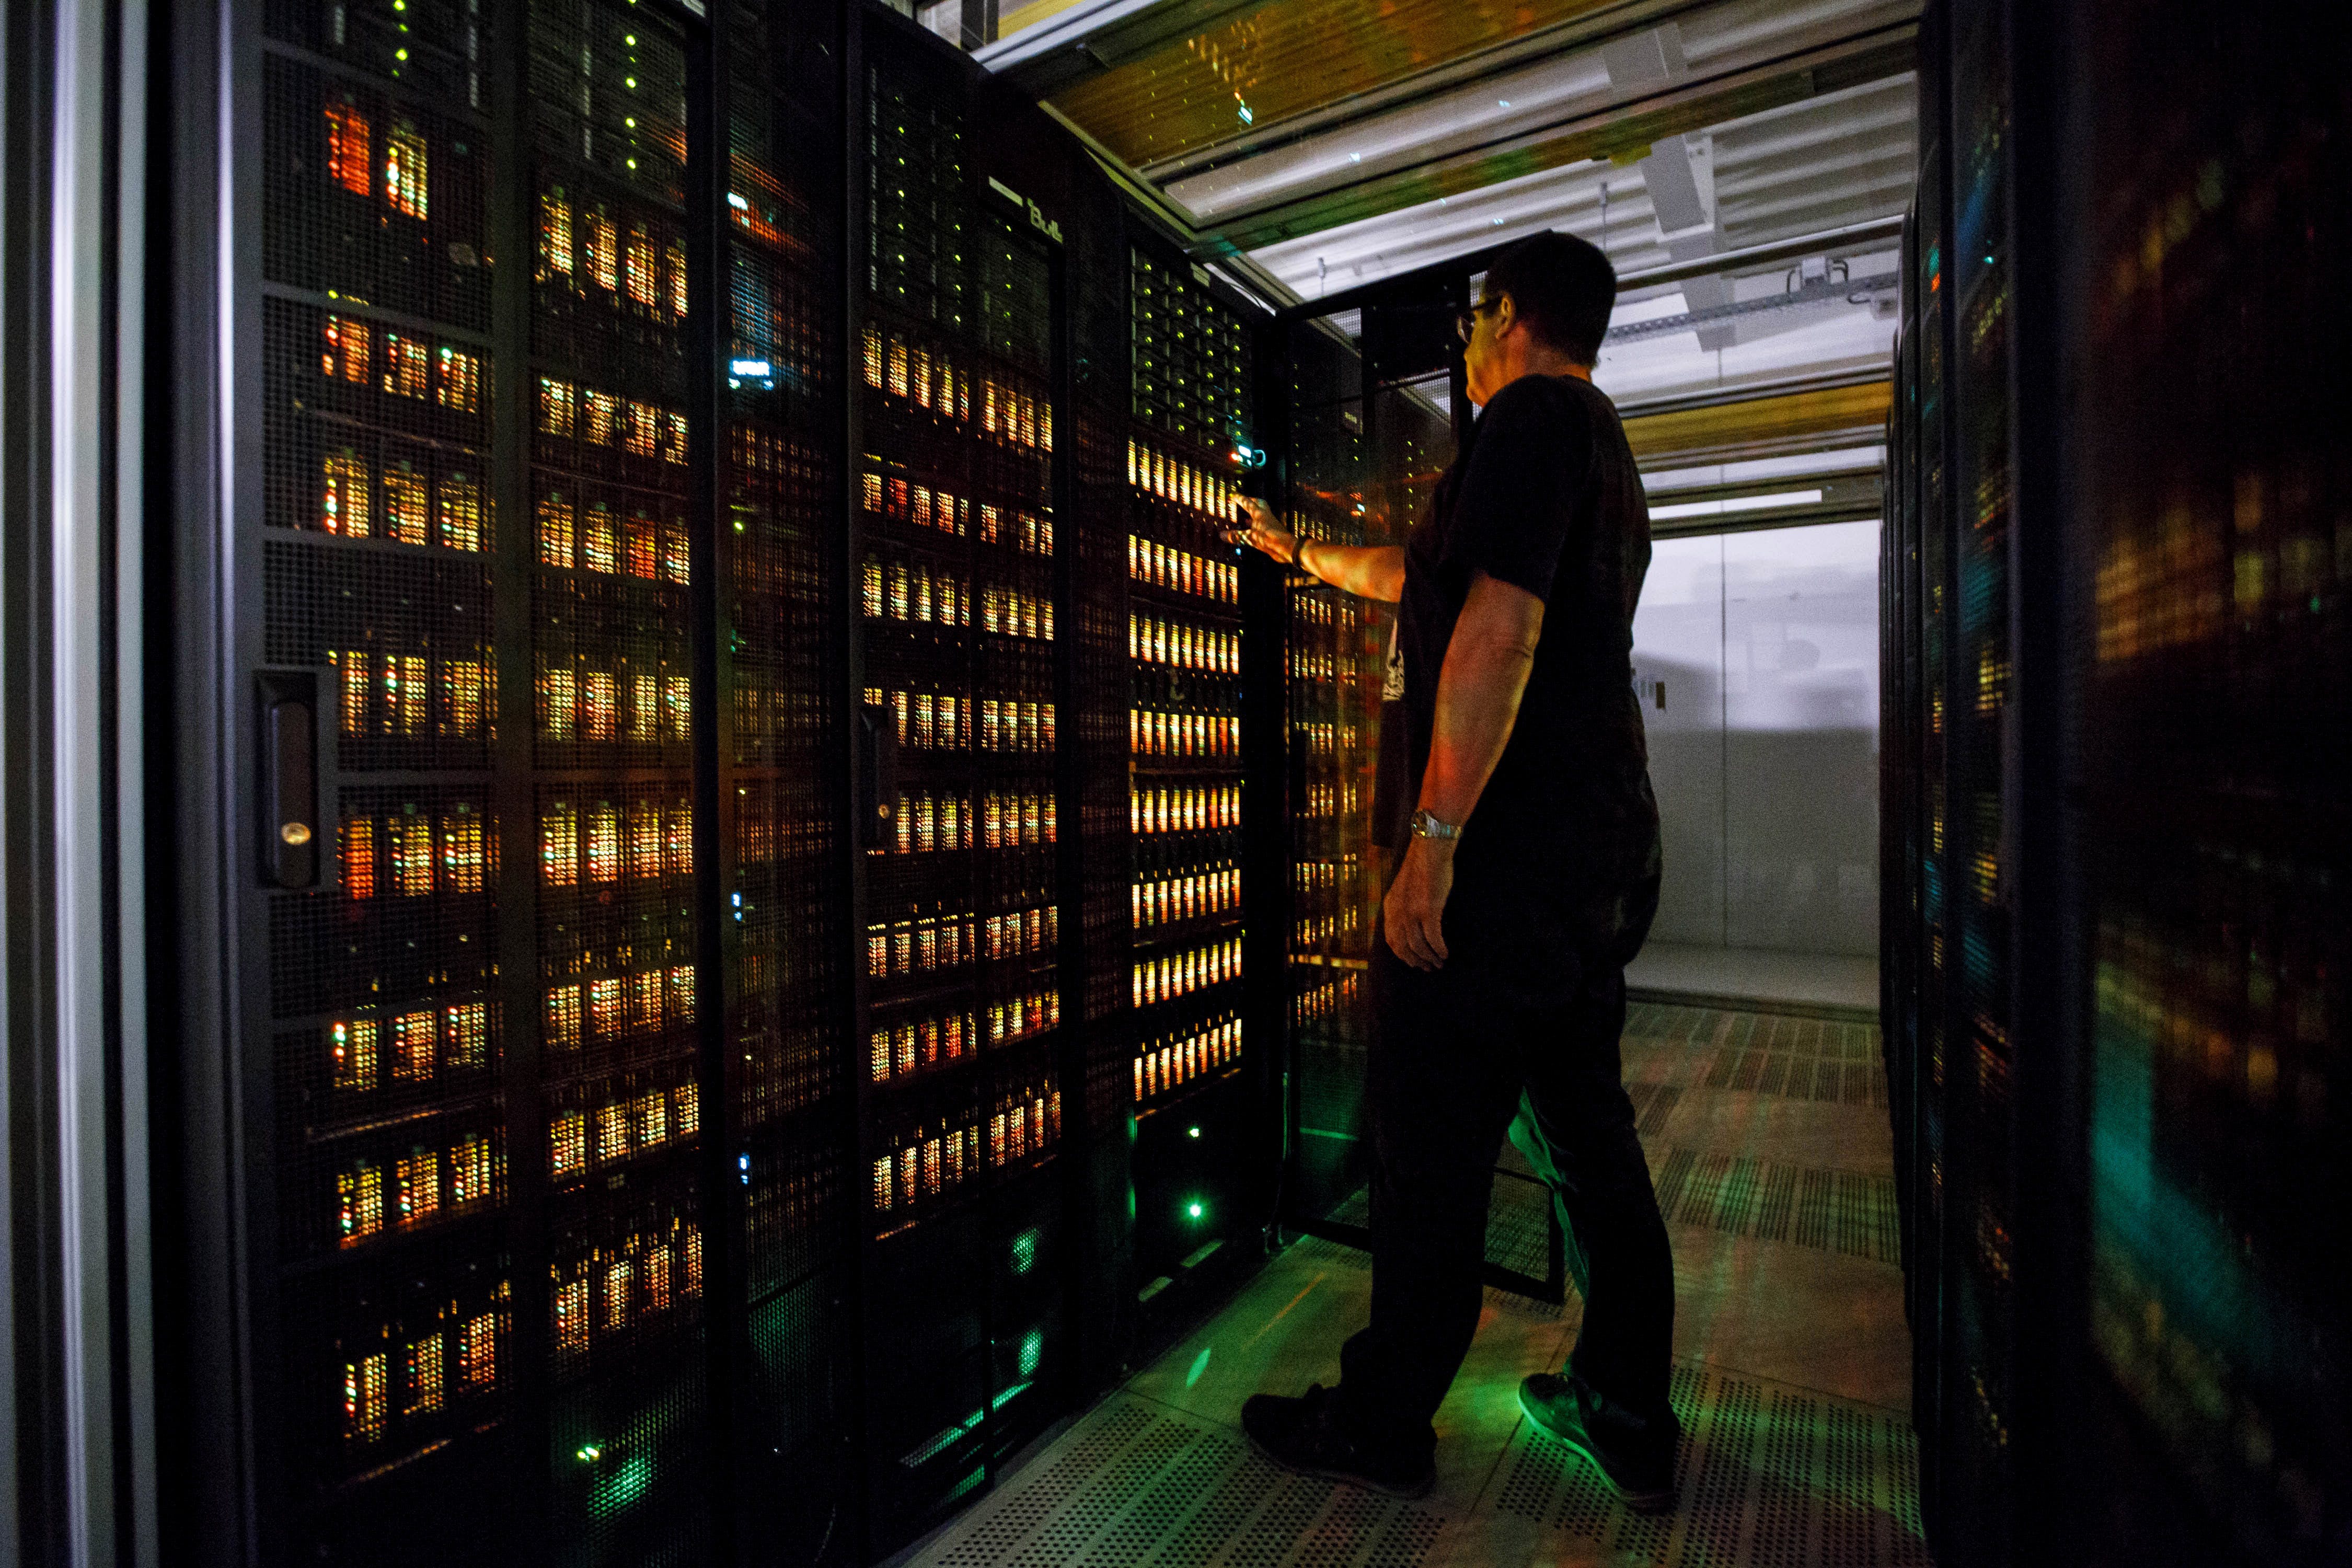 HAMBURG, GERMANY - JUNE 07: An employee of the German Climate Computing Center (DKRZ, or Deutsches Klimarechenzentrum) poses next to the "Mistral" supercomputer, installed in 2016, at the German Climate Computing Center on June 7, 2017 in Hamburg, Germany. The DKRZ provides HPC (high performance computing) and associated services for climate research institutes in Germany. Its high performance computer and storage systems have been specifically selected with respect to climate and Earth system modeling. With a total of 100,000 processor cores, Mistral has a peak performance of 3.6 PetaFLOPS. With a capacity of 54 PBytes, its parallel file system is currently one of the largest in the world. The DKRZ's robot-operated tape archive has currently a capacity of 200 petabytes and allows for long-term archiving of climate simulations such as those carried out with respect to reports by the Intergovernmental Panel on Climate Change. (Photo by Morris MacMatzen/Getty Images)